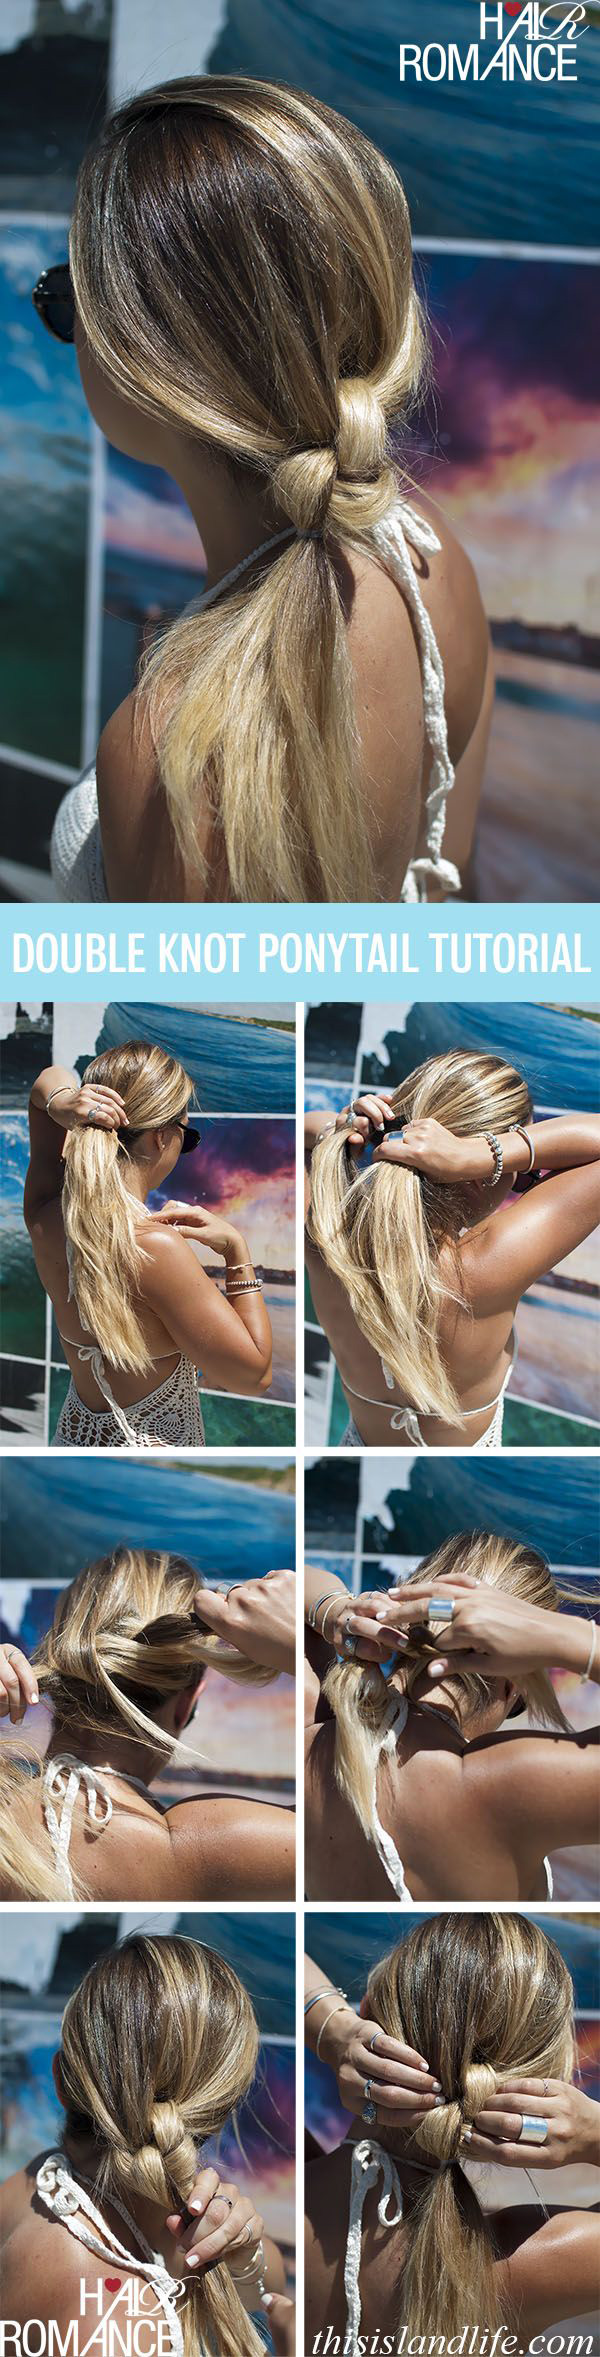 Double Knot Ponitail Hairstyle Tutorial 